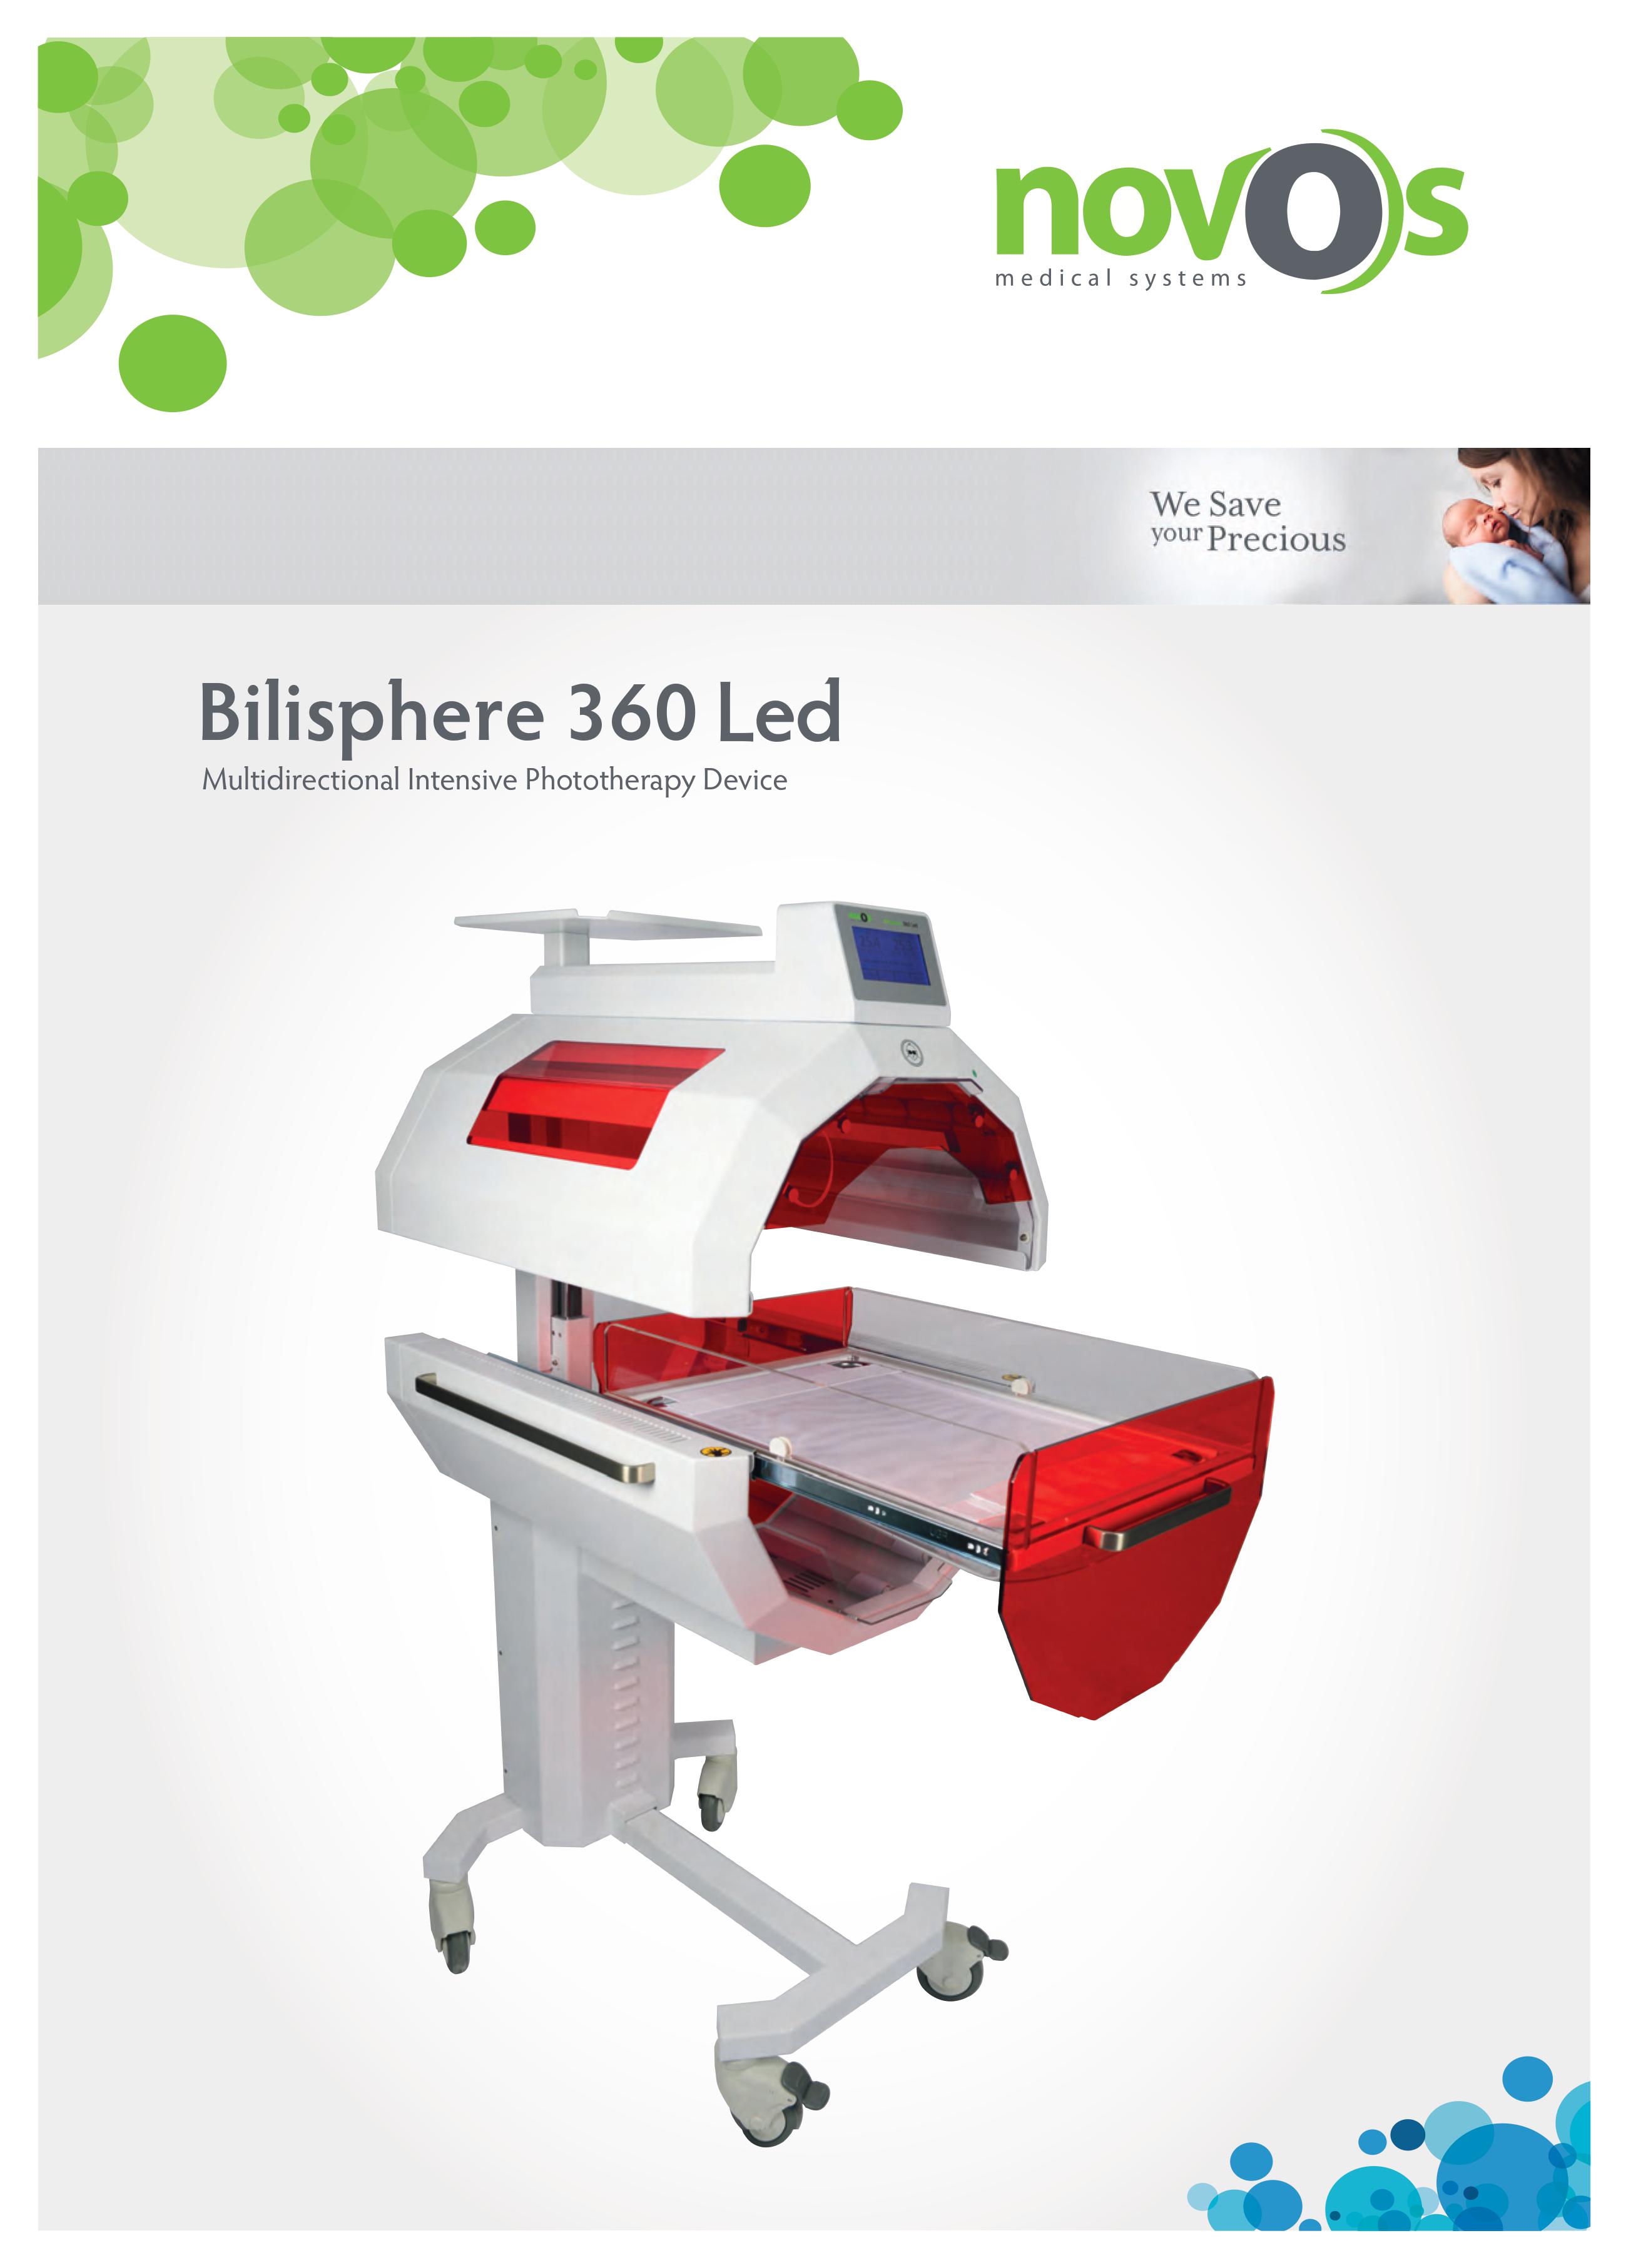 Pediatric 360 degree Phototherapy Device for NICU